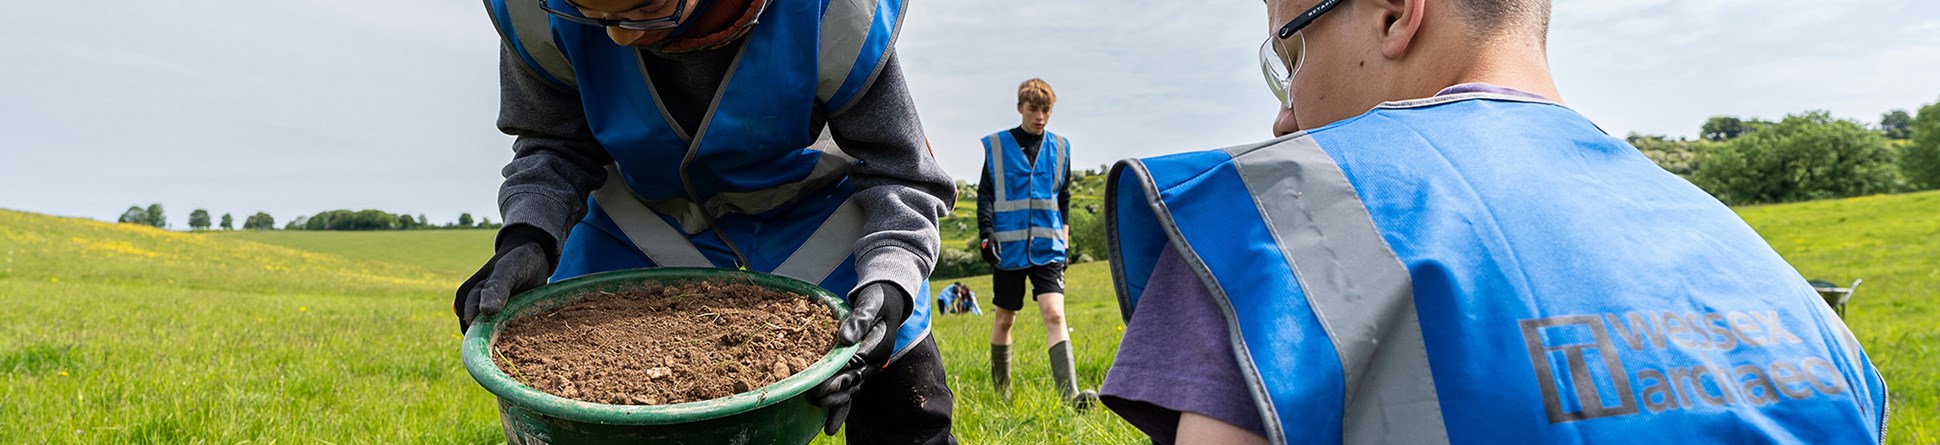 Young people sieving soil in a field as part of an archaeological dig.